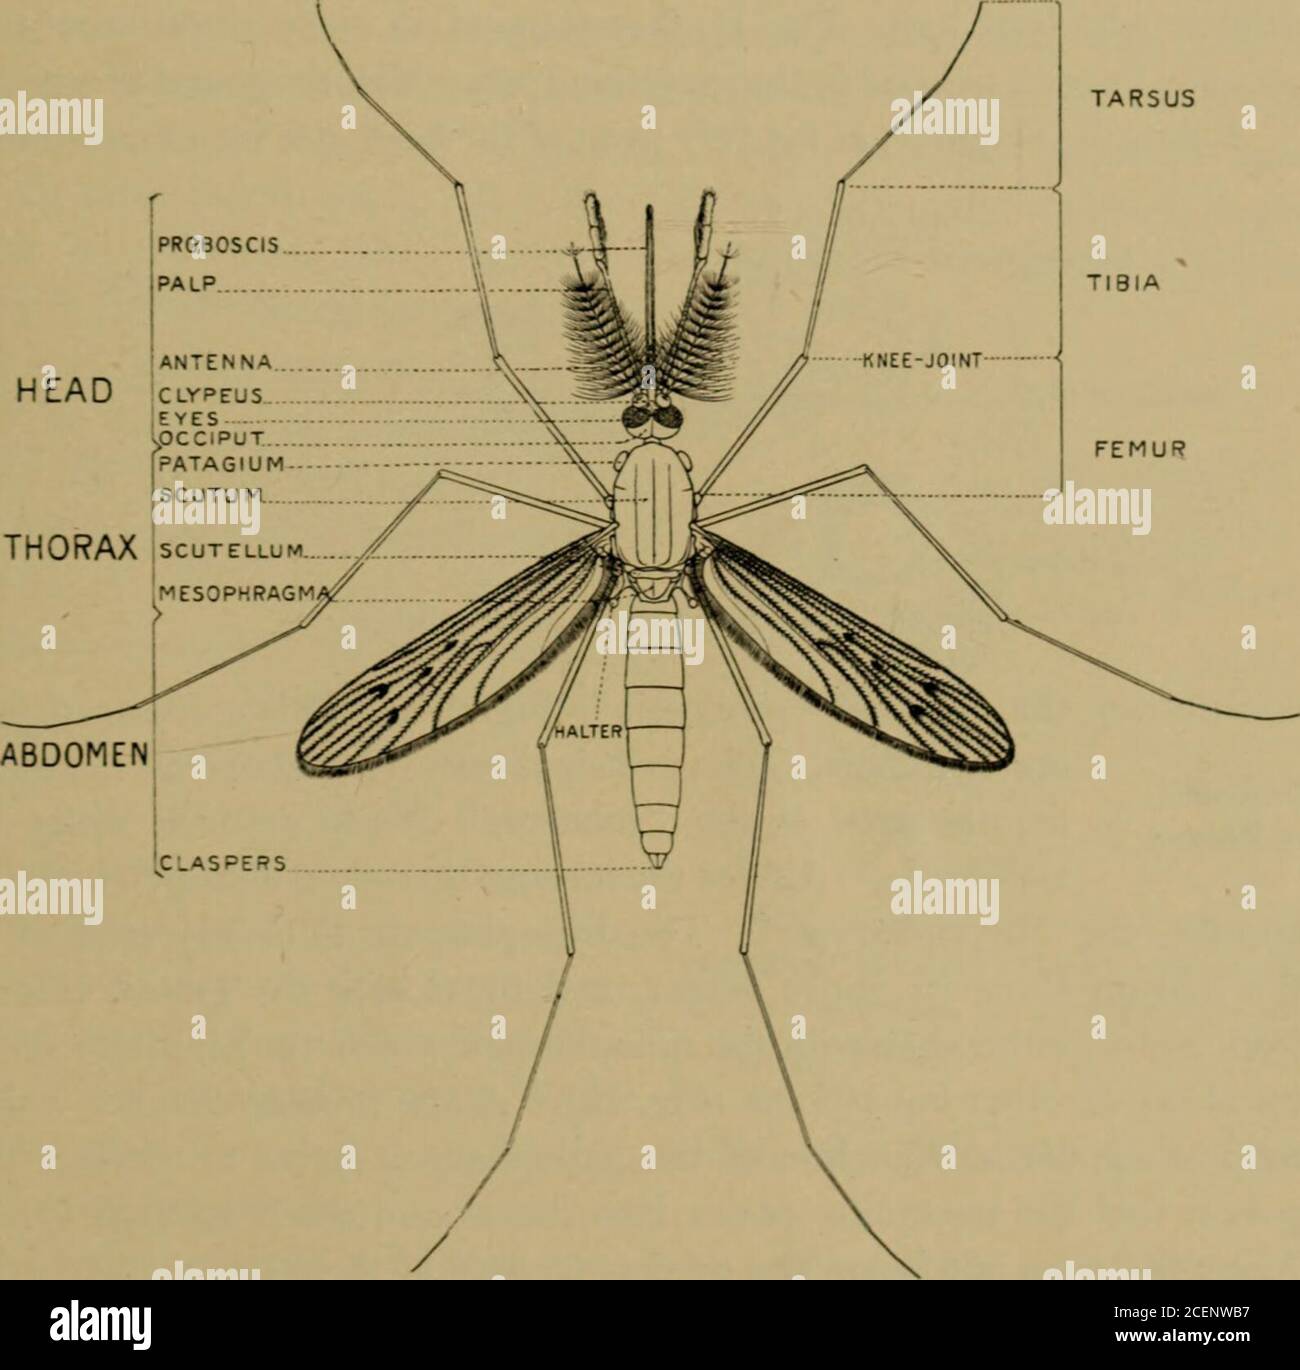 . Guide leaflet. thin their pupal integument. Photographfrom life, greatly enlarged. which the muscles of the insect are attached. Wherever rigidity isrequired, the chitinous coat is thickened, but elsewhere it remains thinto permit movement of the body segments. Three main regions of the body may be easily distinguished, the smallDivisions rounded head with its appendages, the relatively large tho-of Body rax a)1(j t]ie elongated abdomen (Figs. 1 and 17). The head,which is connected with the bodv bv means of a rather slender neck, DAHLGREN, THE MALARIA MOSQUITO 23 bears the mouth-parts and sp Stock Photo